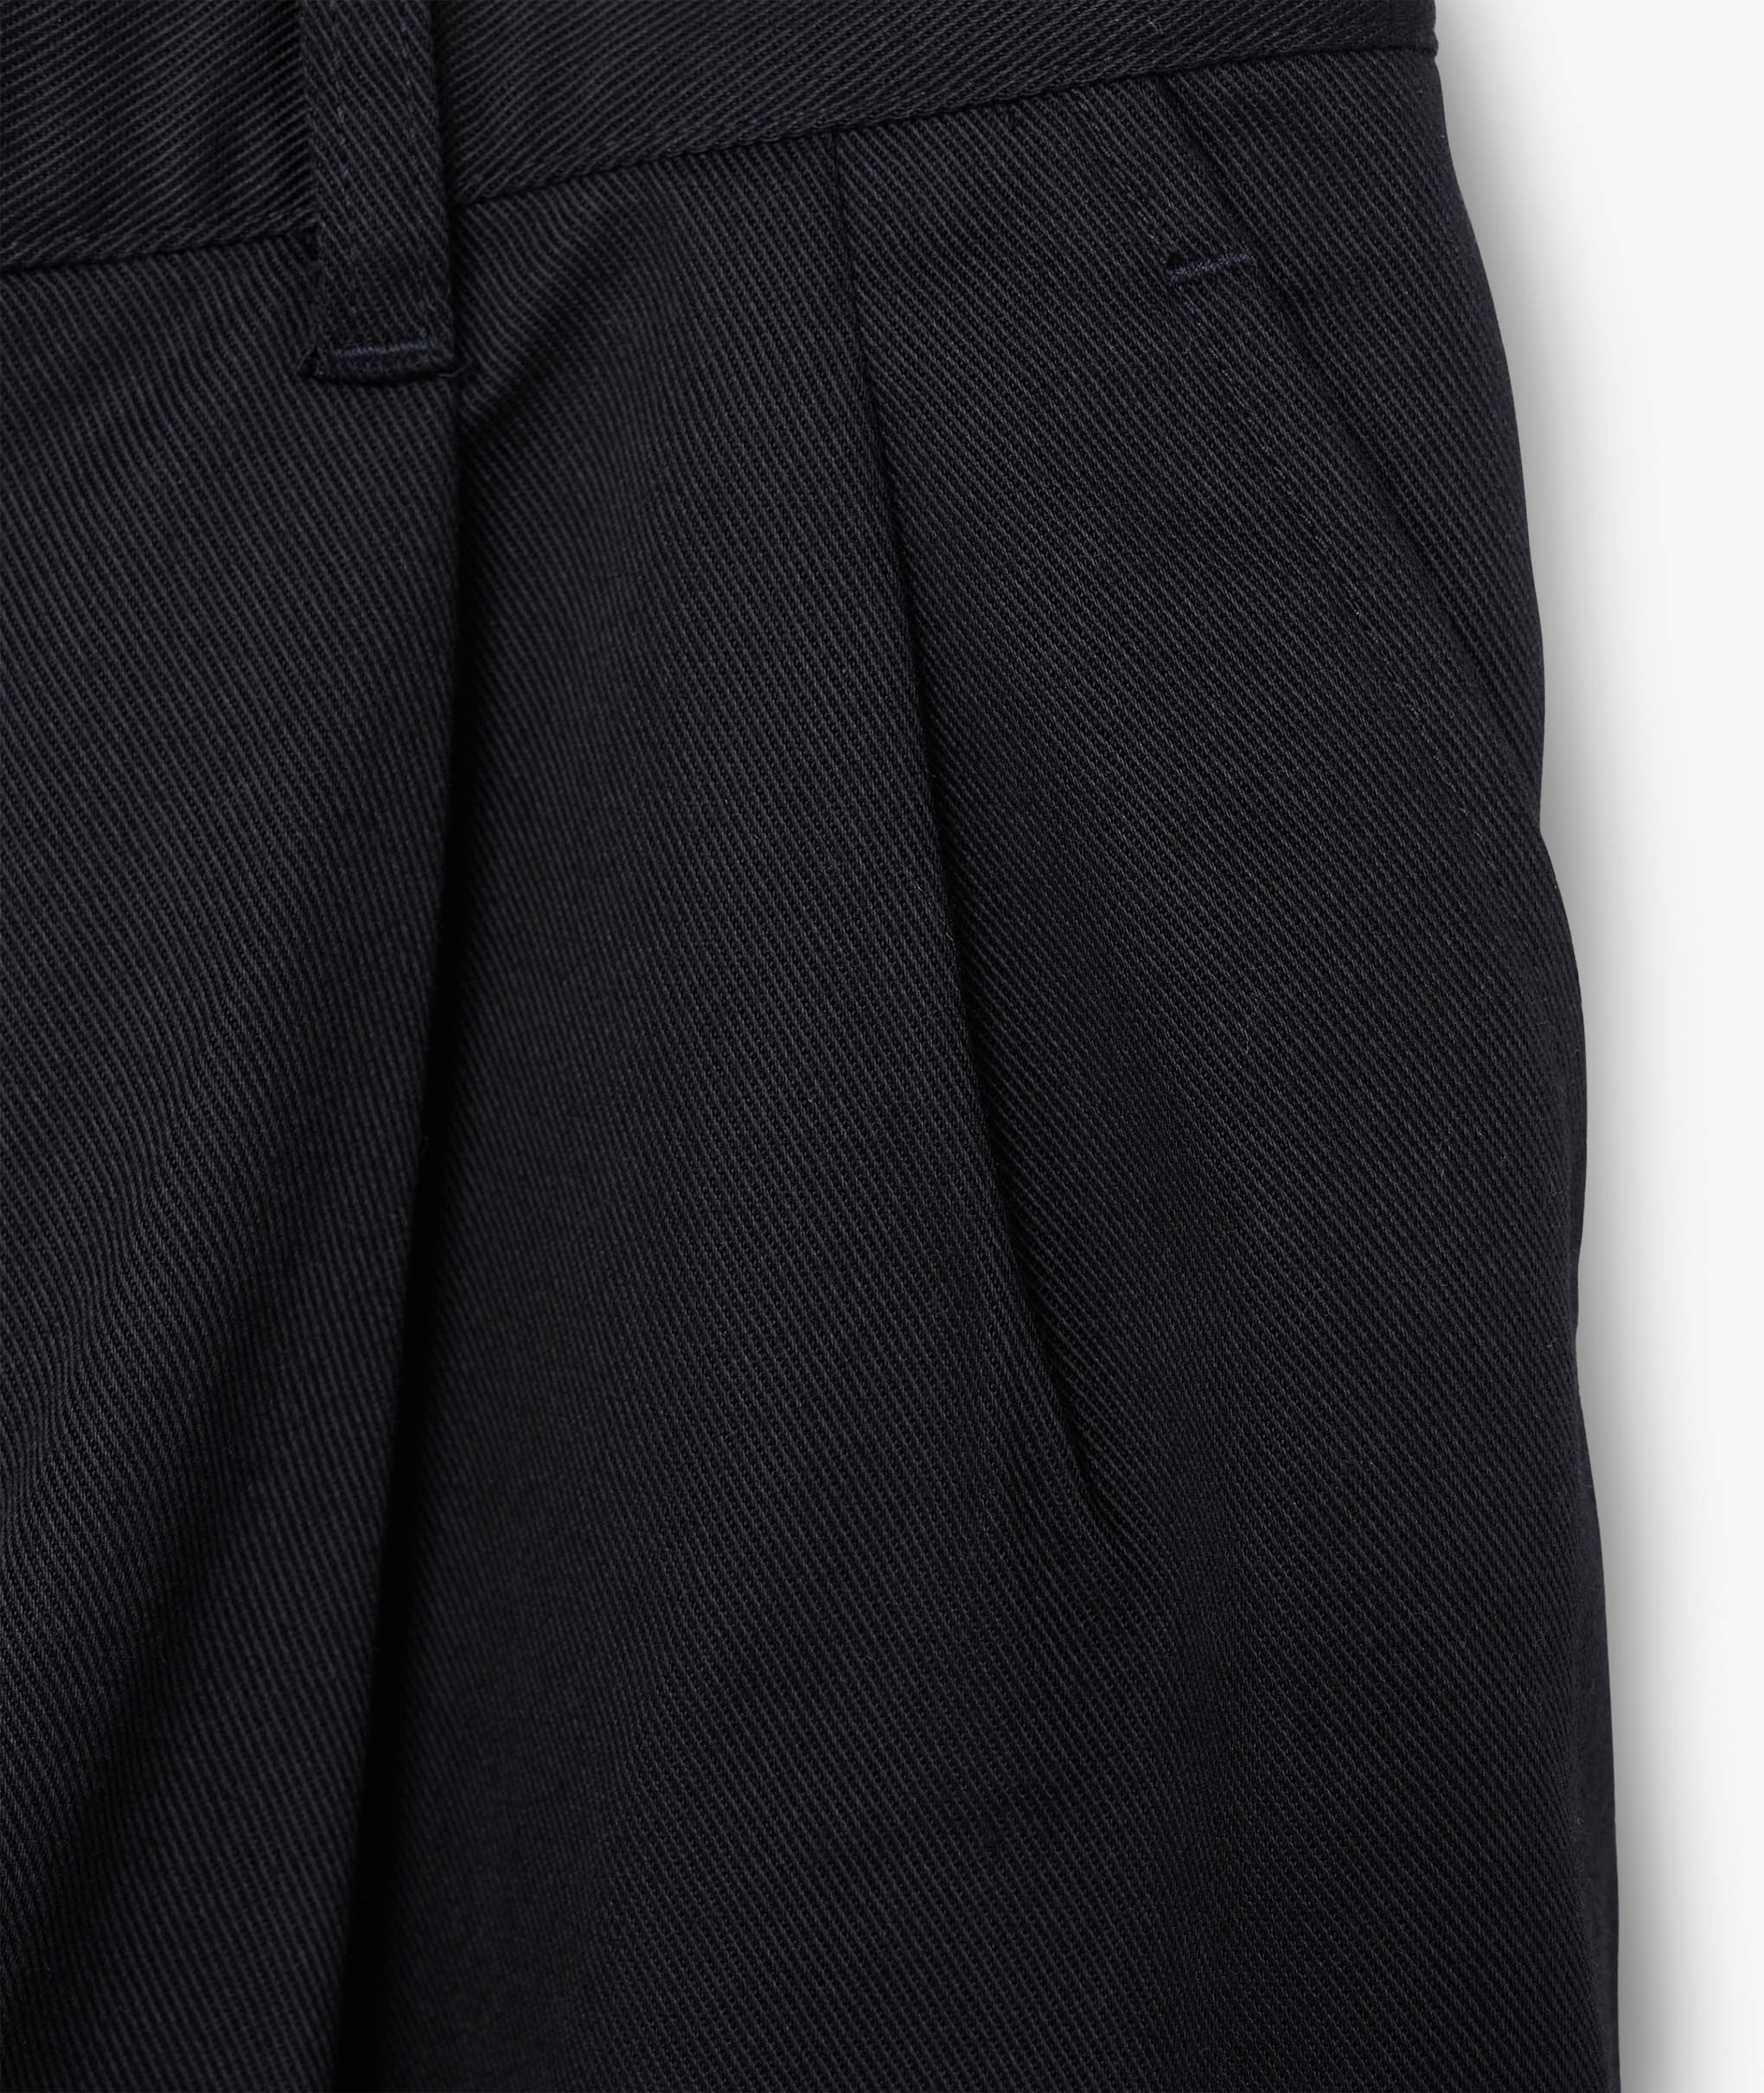 Norse Store | Shipping Worldwide - Danton Tuck Belted Pants - Black